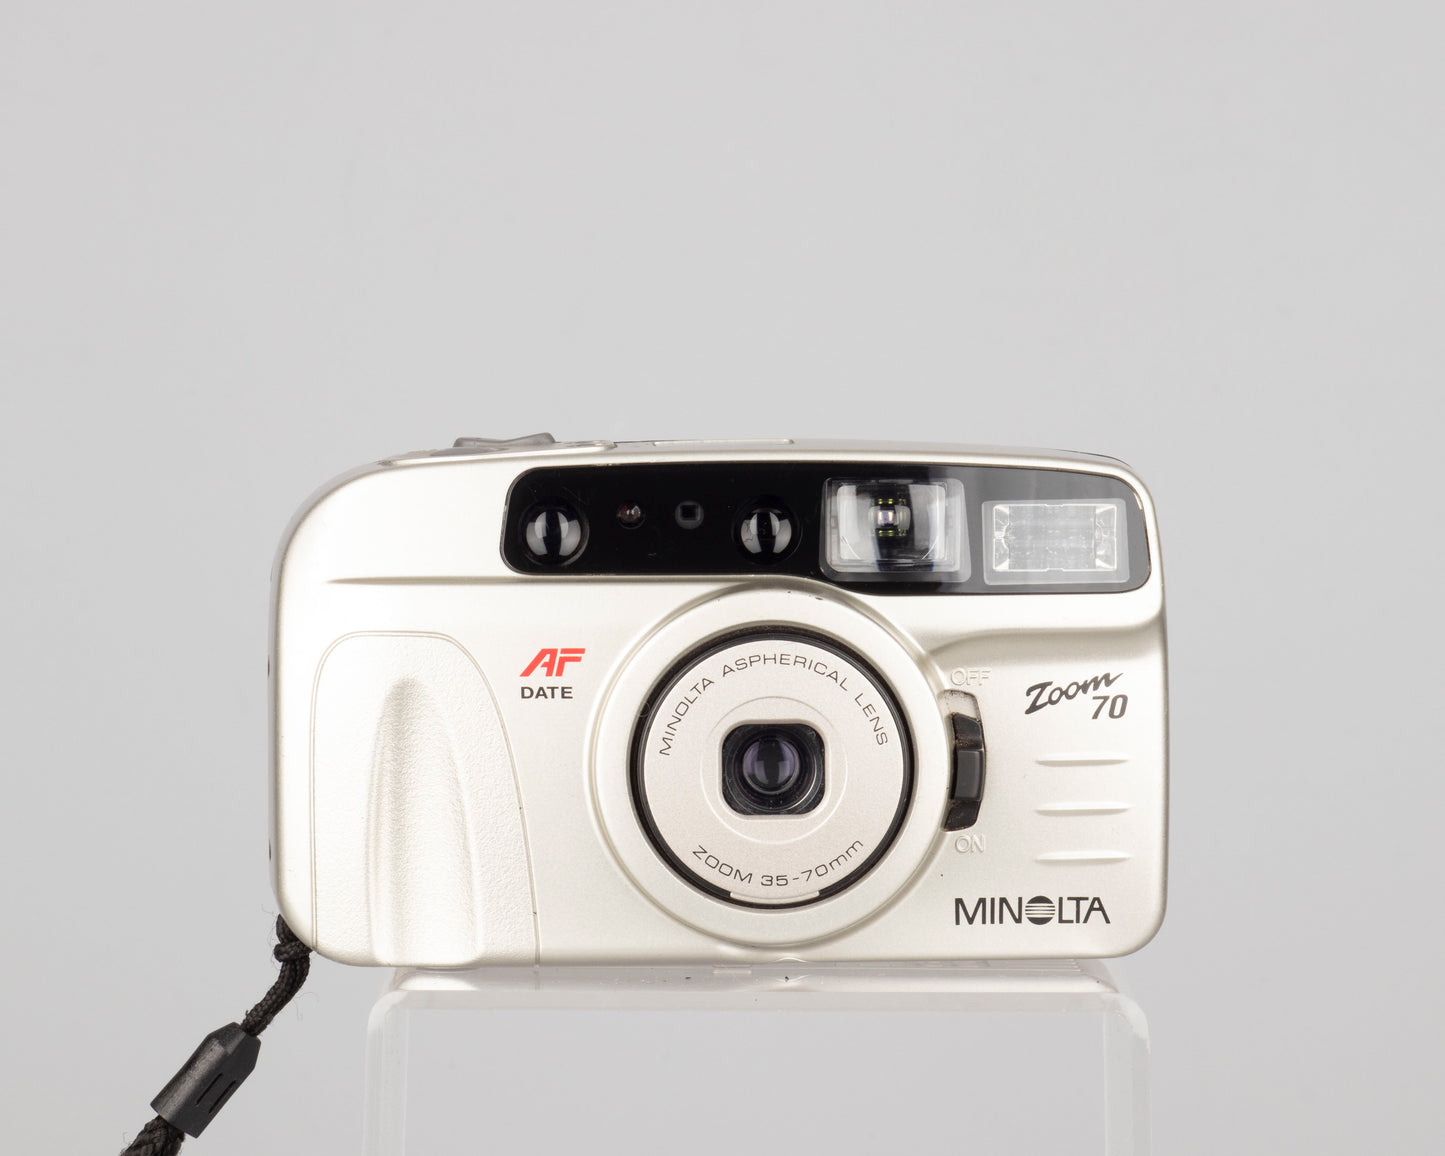 The Minolta Zoom 70 is a simple 35mm point-and-shoot with a quality 35-70mm lens featuring aspherical elements